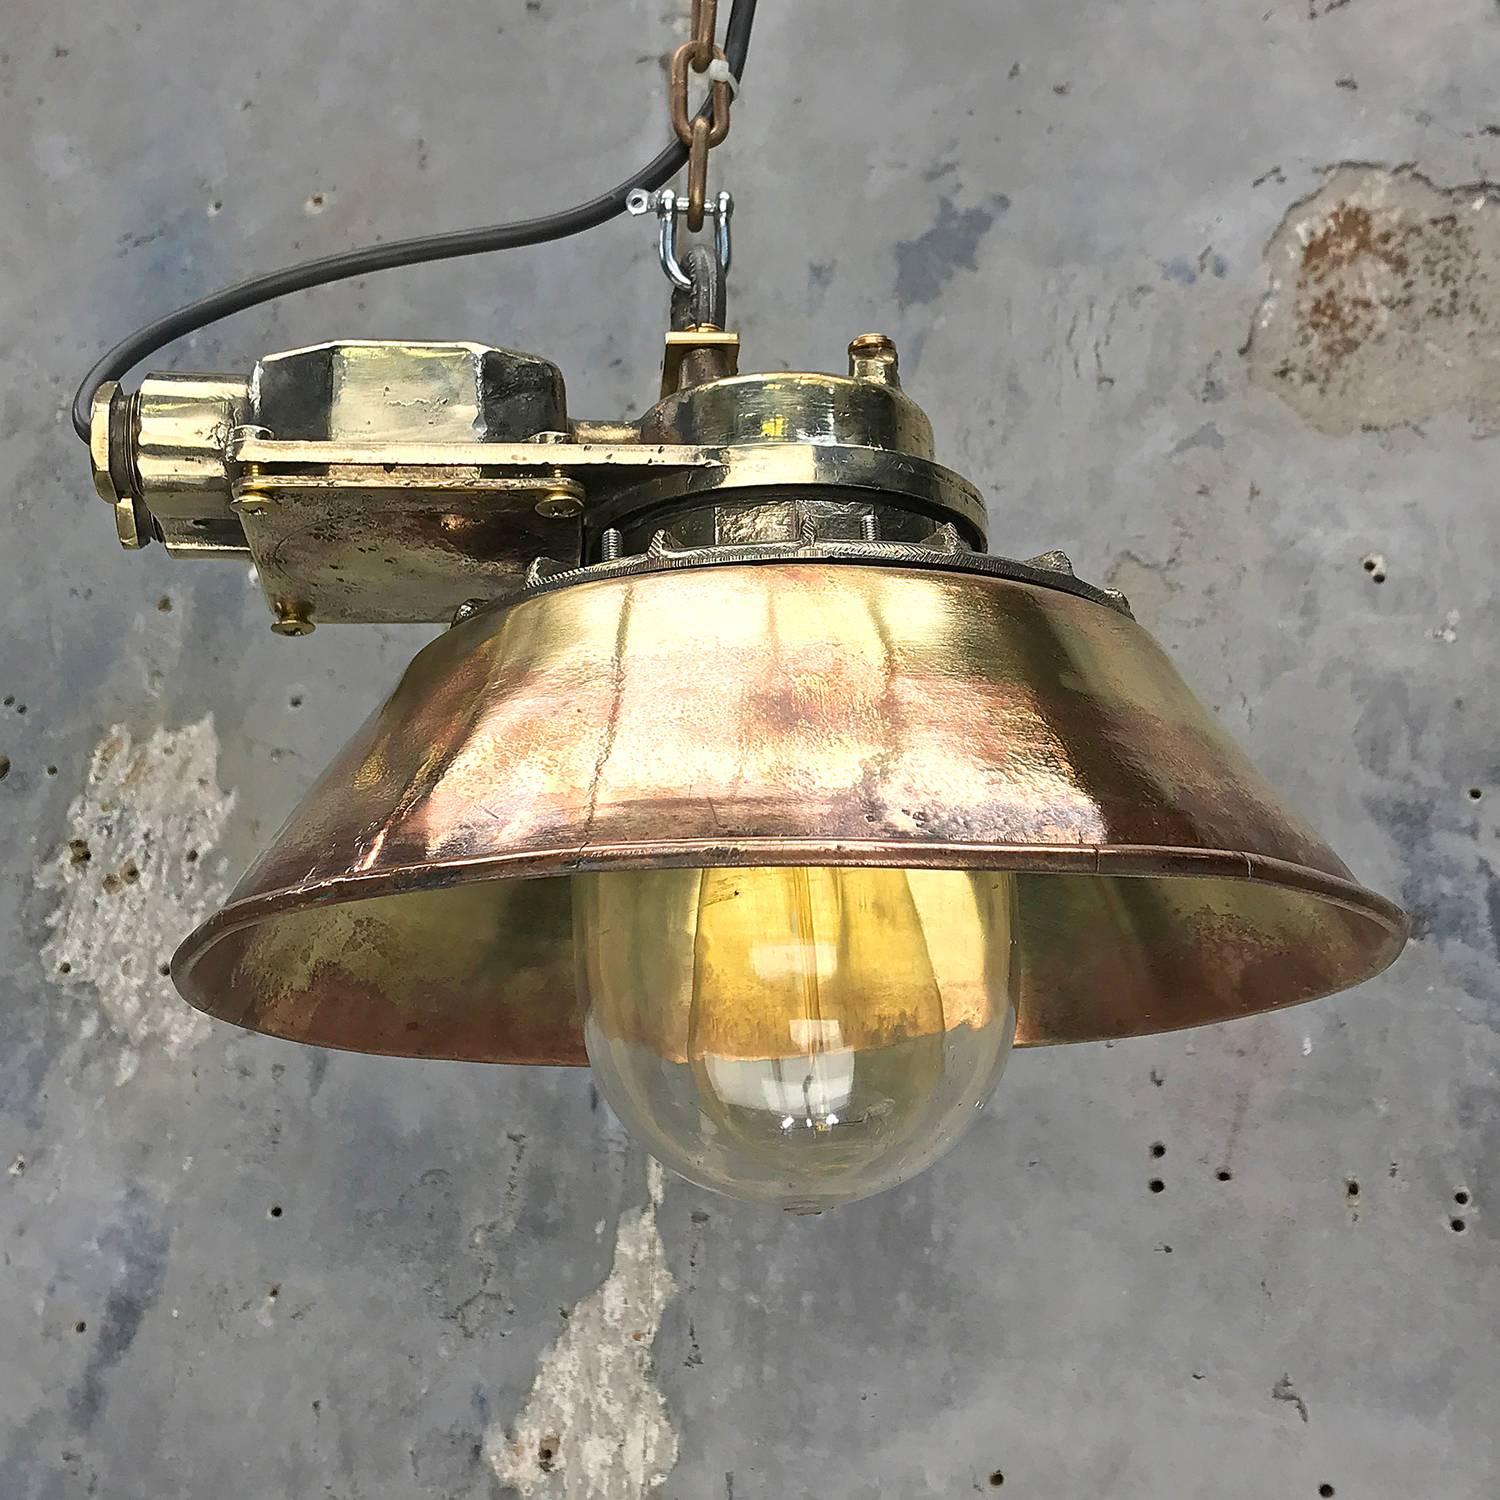 Becoming more sought after and not often seen, these reclaimed original 1950's flush mount lamps have been expertly modified to pendant lights.

The main body of the light is made from cast brass, with a machine pressed conical brass shade, and